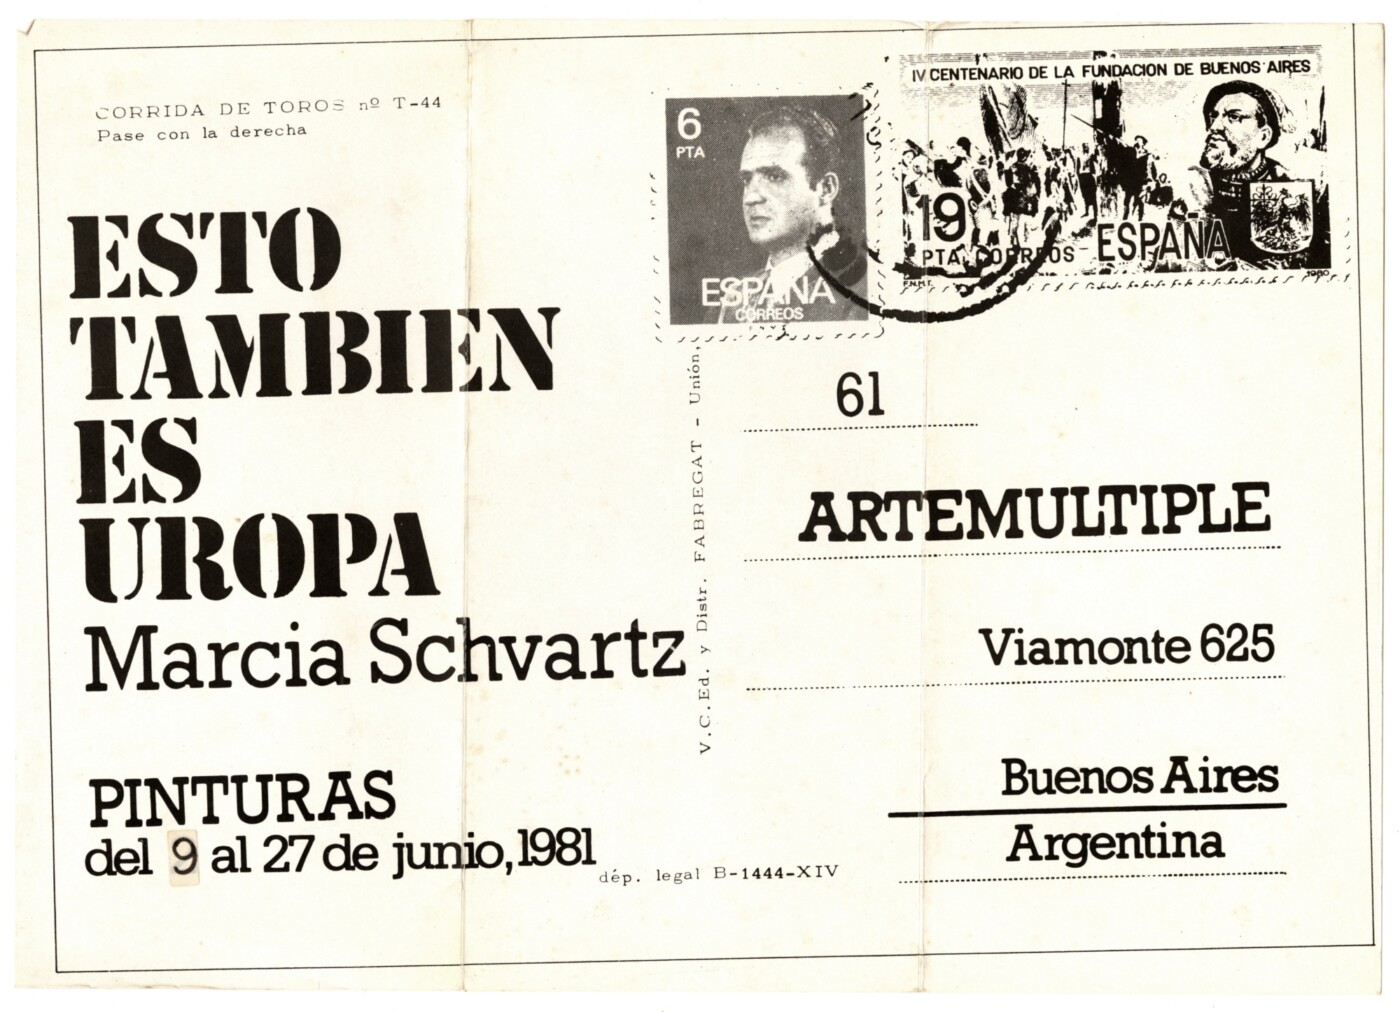 A horizontal white postcard printed in black and white. On the left side of the card are printed the exhibition’s title and dates. At the top right of the card, Spanish postage stamps have been printed as part of the postcard’s design. The stamp on the left features a photo of then King of Spain Juan Carlos I and reads, from top to bottom, “6 pta.,” “España,” and “Correos.” The stamp on the right is wide and rectangular, depicting a historical scene. It reads, from top to bottom, “IV Centenario de la Fundación de Buenos Aires,” “19 pta.,” and “Correos—España.” Below these are printed the gallery’s name and location.